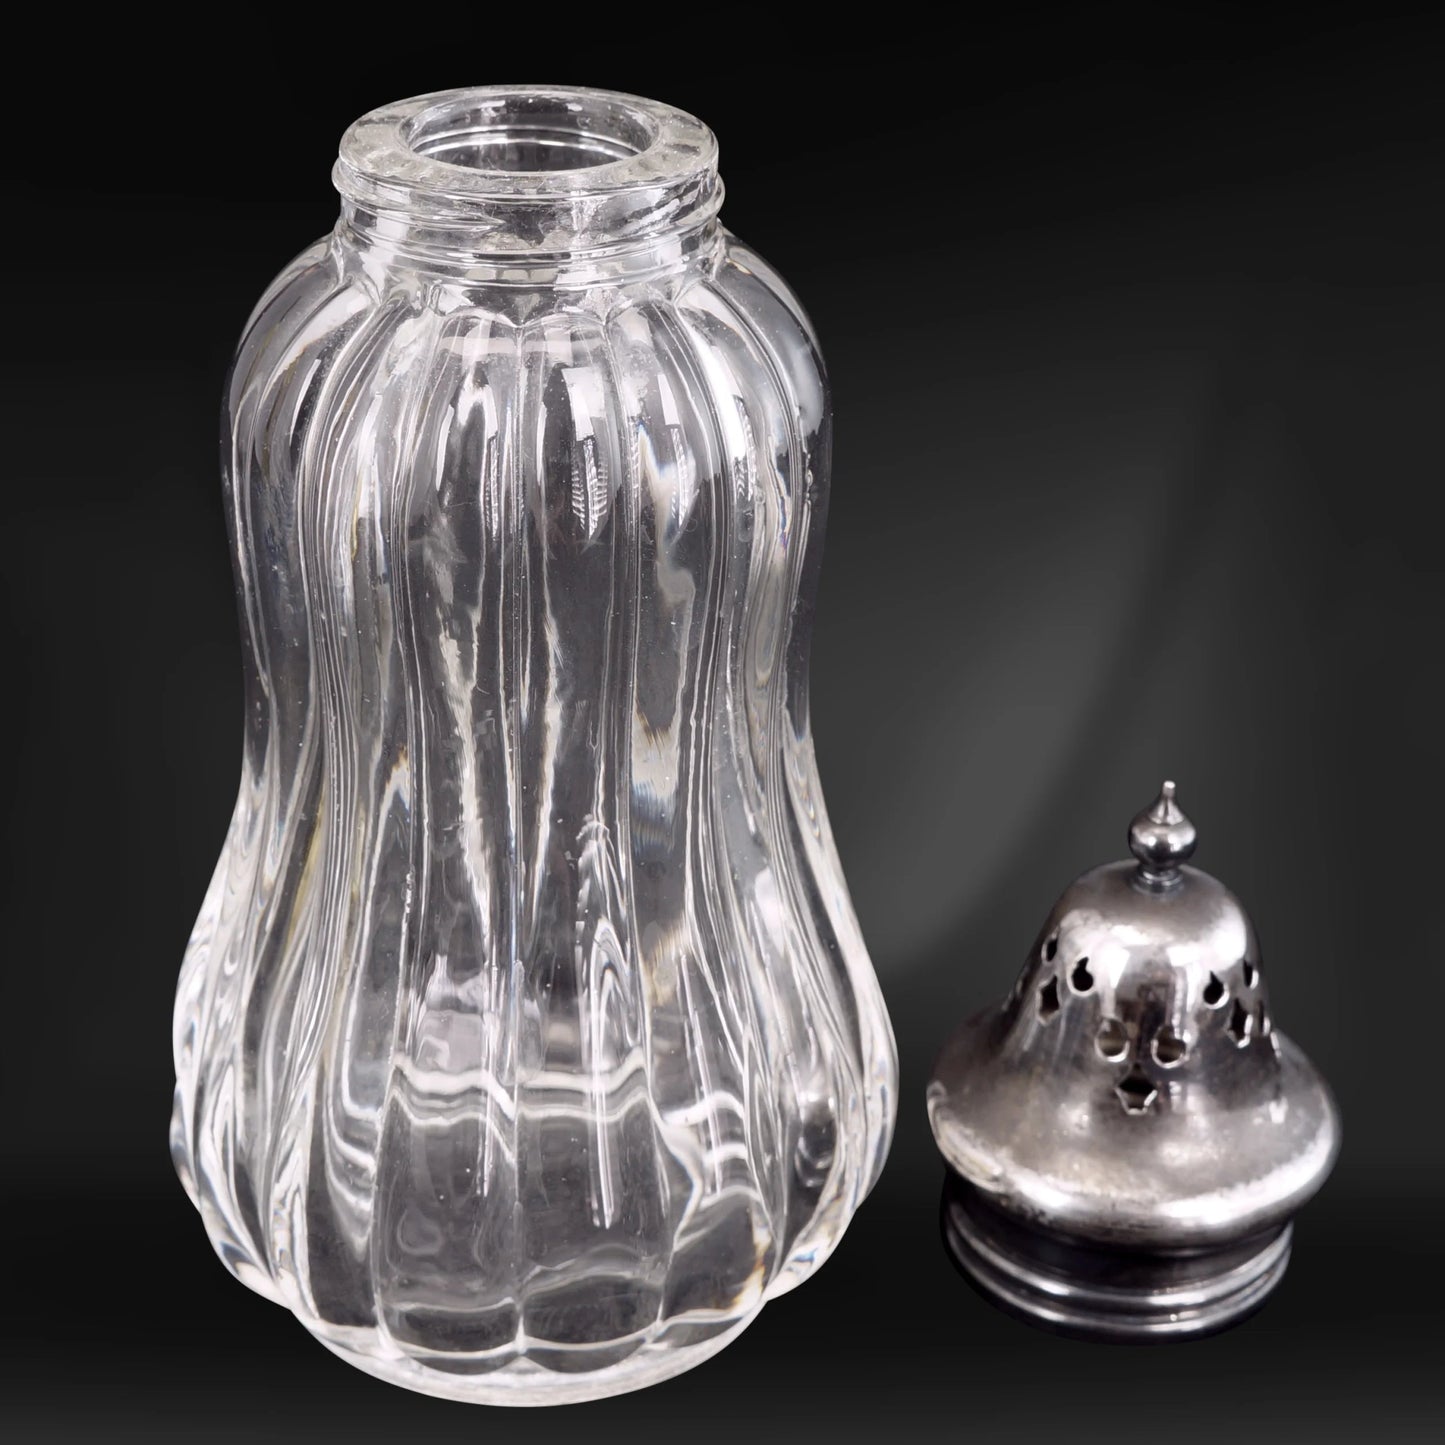 English Silverplate and Glass Sugar Shaker Circa 1930 - Bear and Raven Antiques